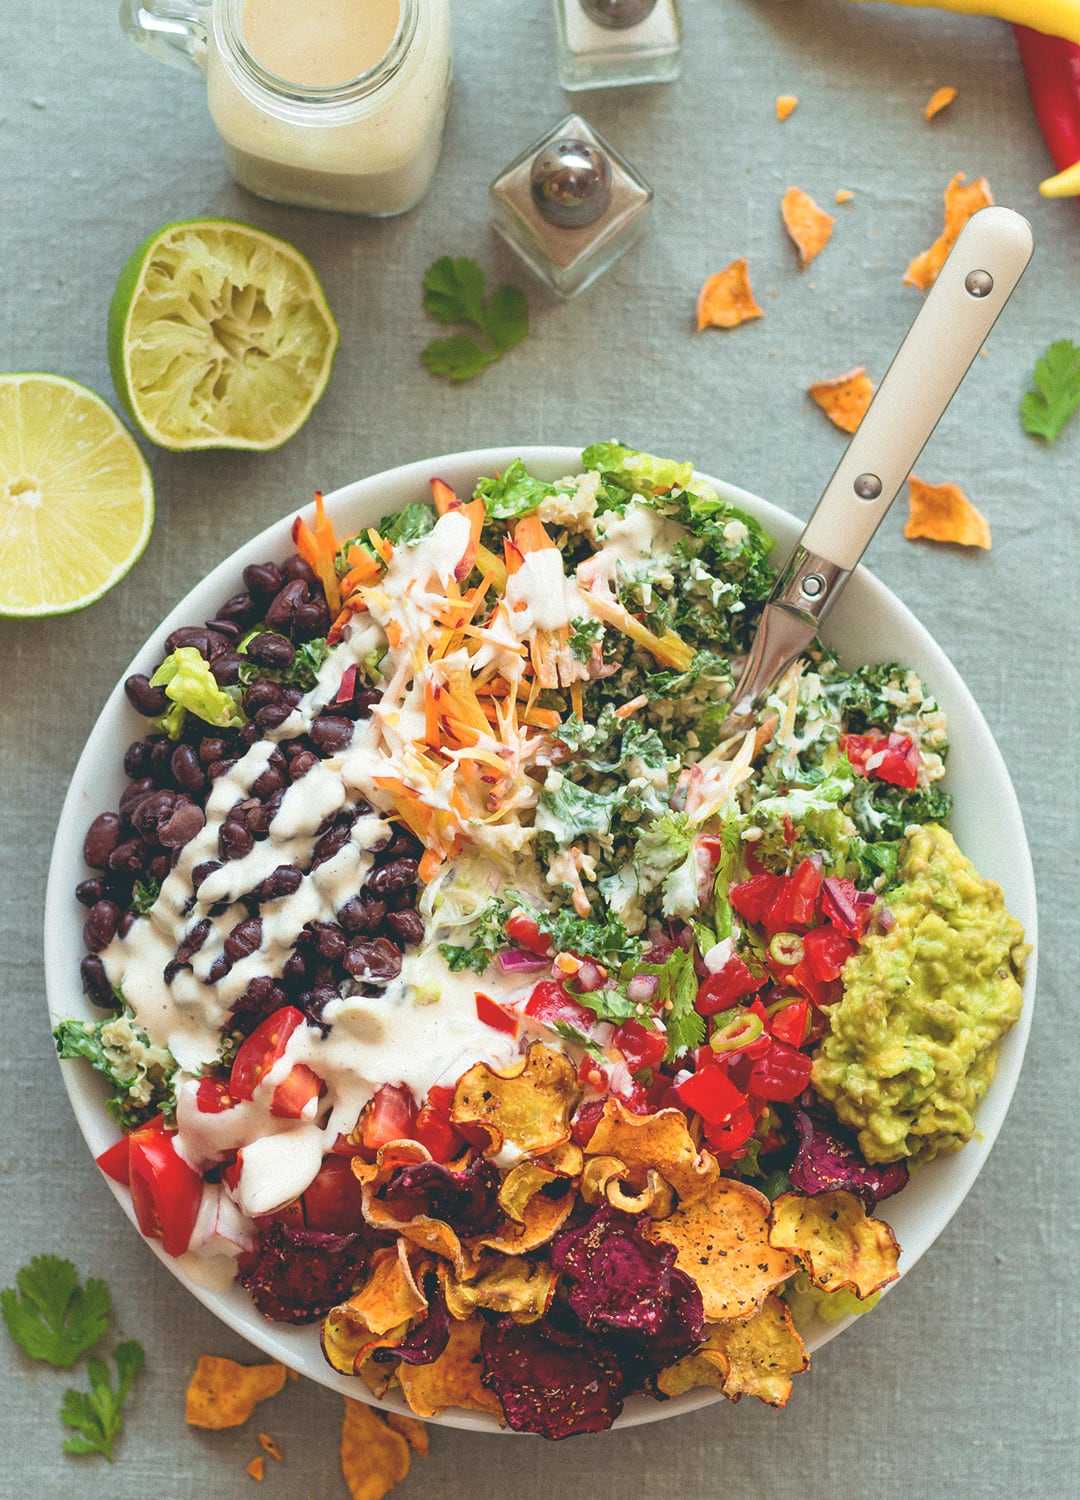 Mexican Kale Salad with Cashew Dressing aka the best salad in the world. Kale, black beans, spicy salsa, guacamole, cherry tomatoes, carrots, veggie chips, and amazing cashew dressing! | thehealthfulideas.com